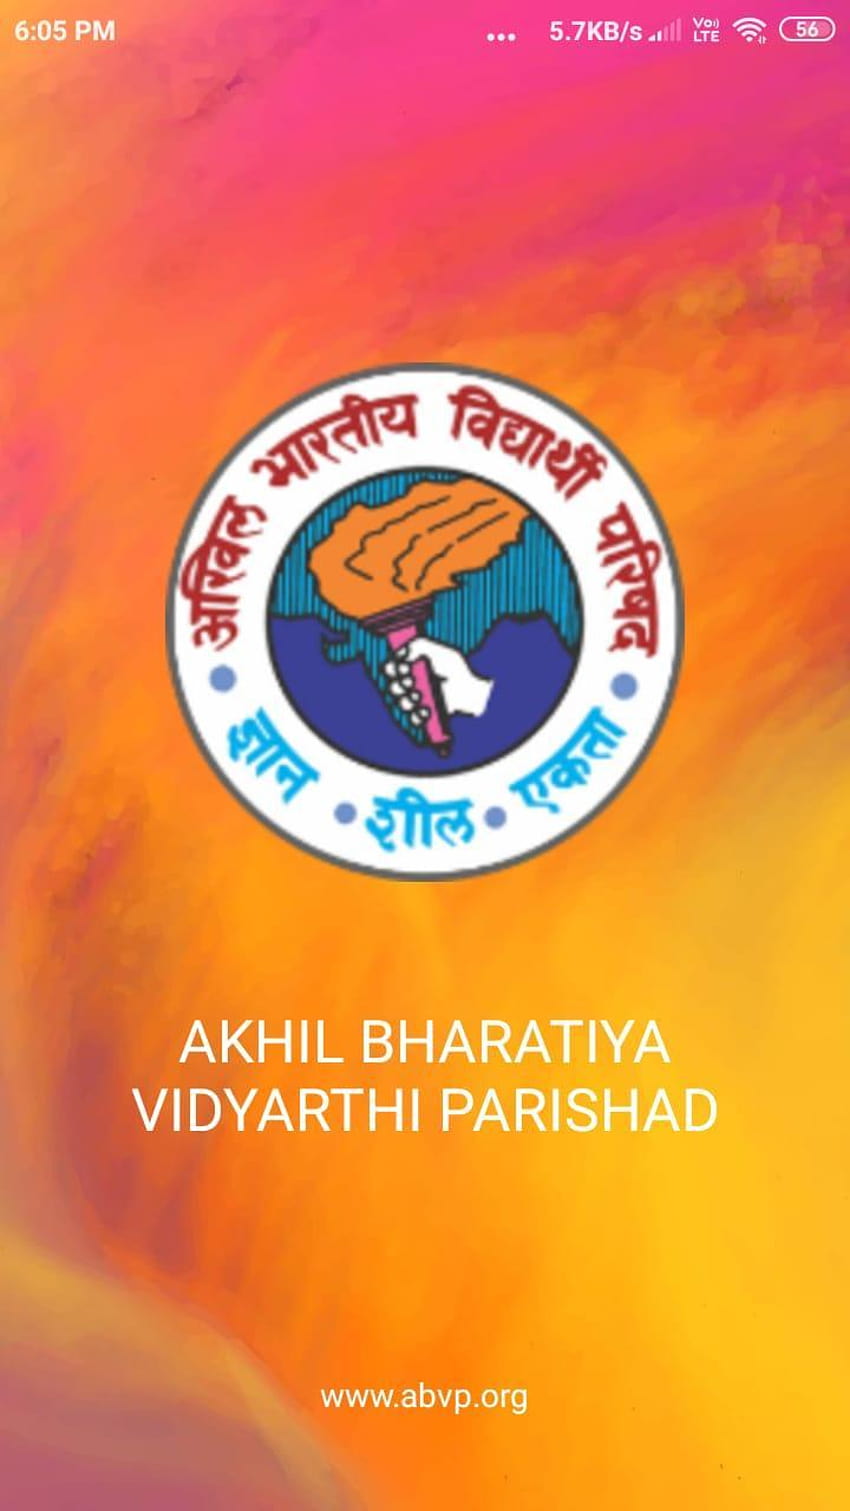 ABVP for Android HD phone wallpaper | Pxfuel